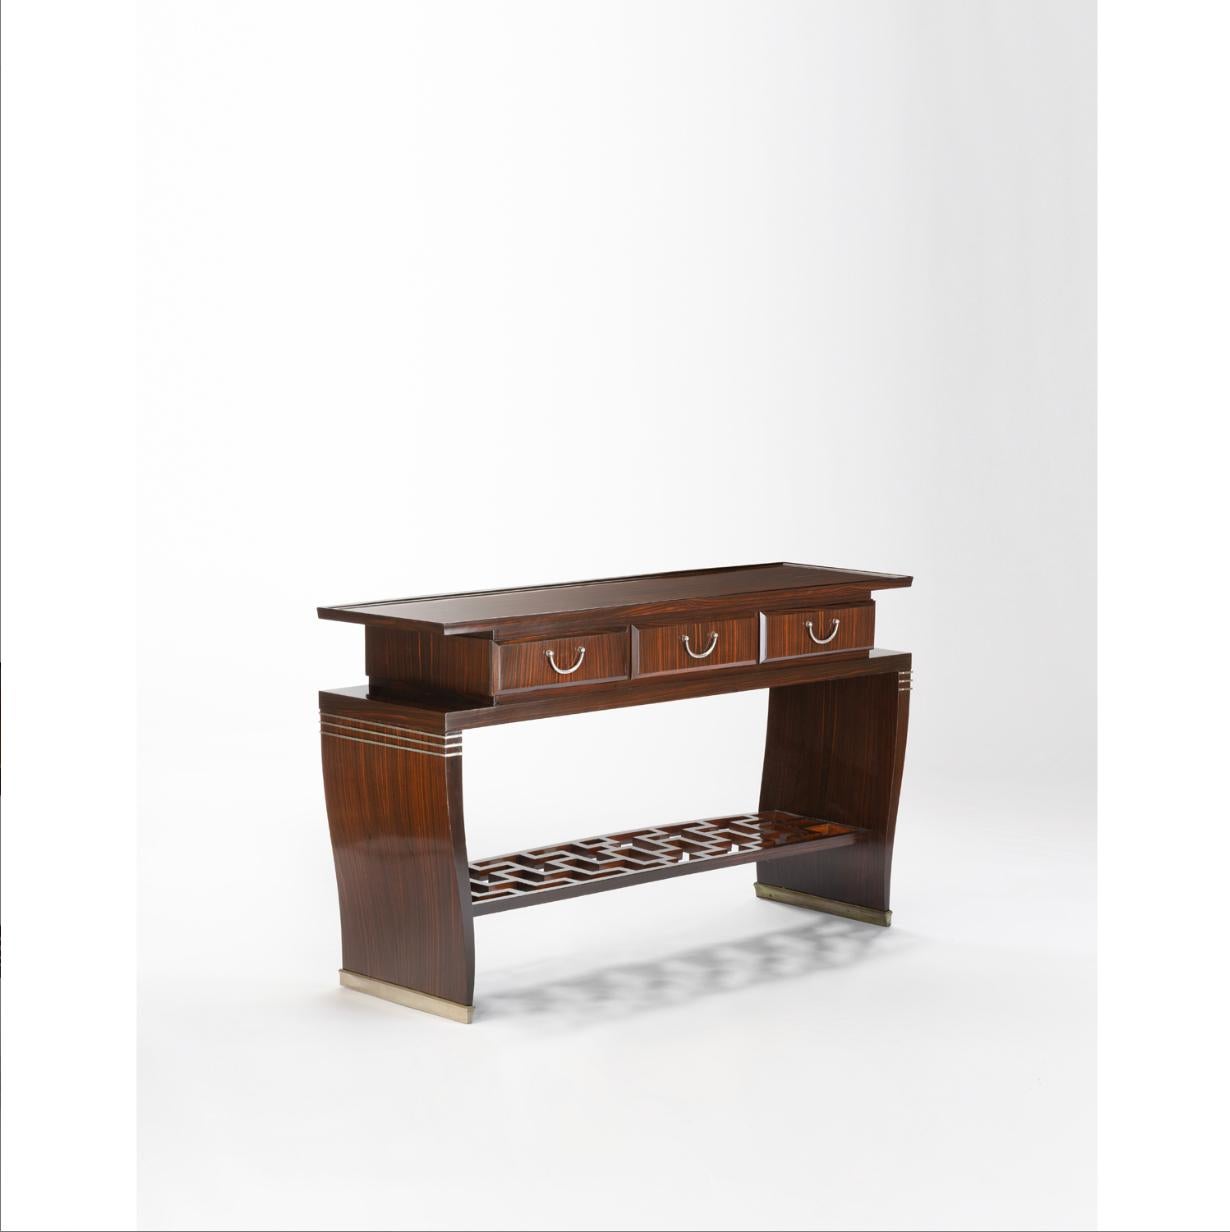 Paolo Buffa (1903-1970) , Console in Walnut, rosewood veneer and silvered brass, Italy 1930s 

Very rare console designed by Paolo Buffa and exhibited for the first time at the IV International of Decorative, Industrial and Modern Art in Monza in